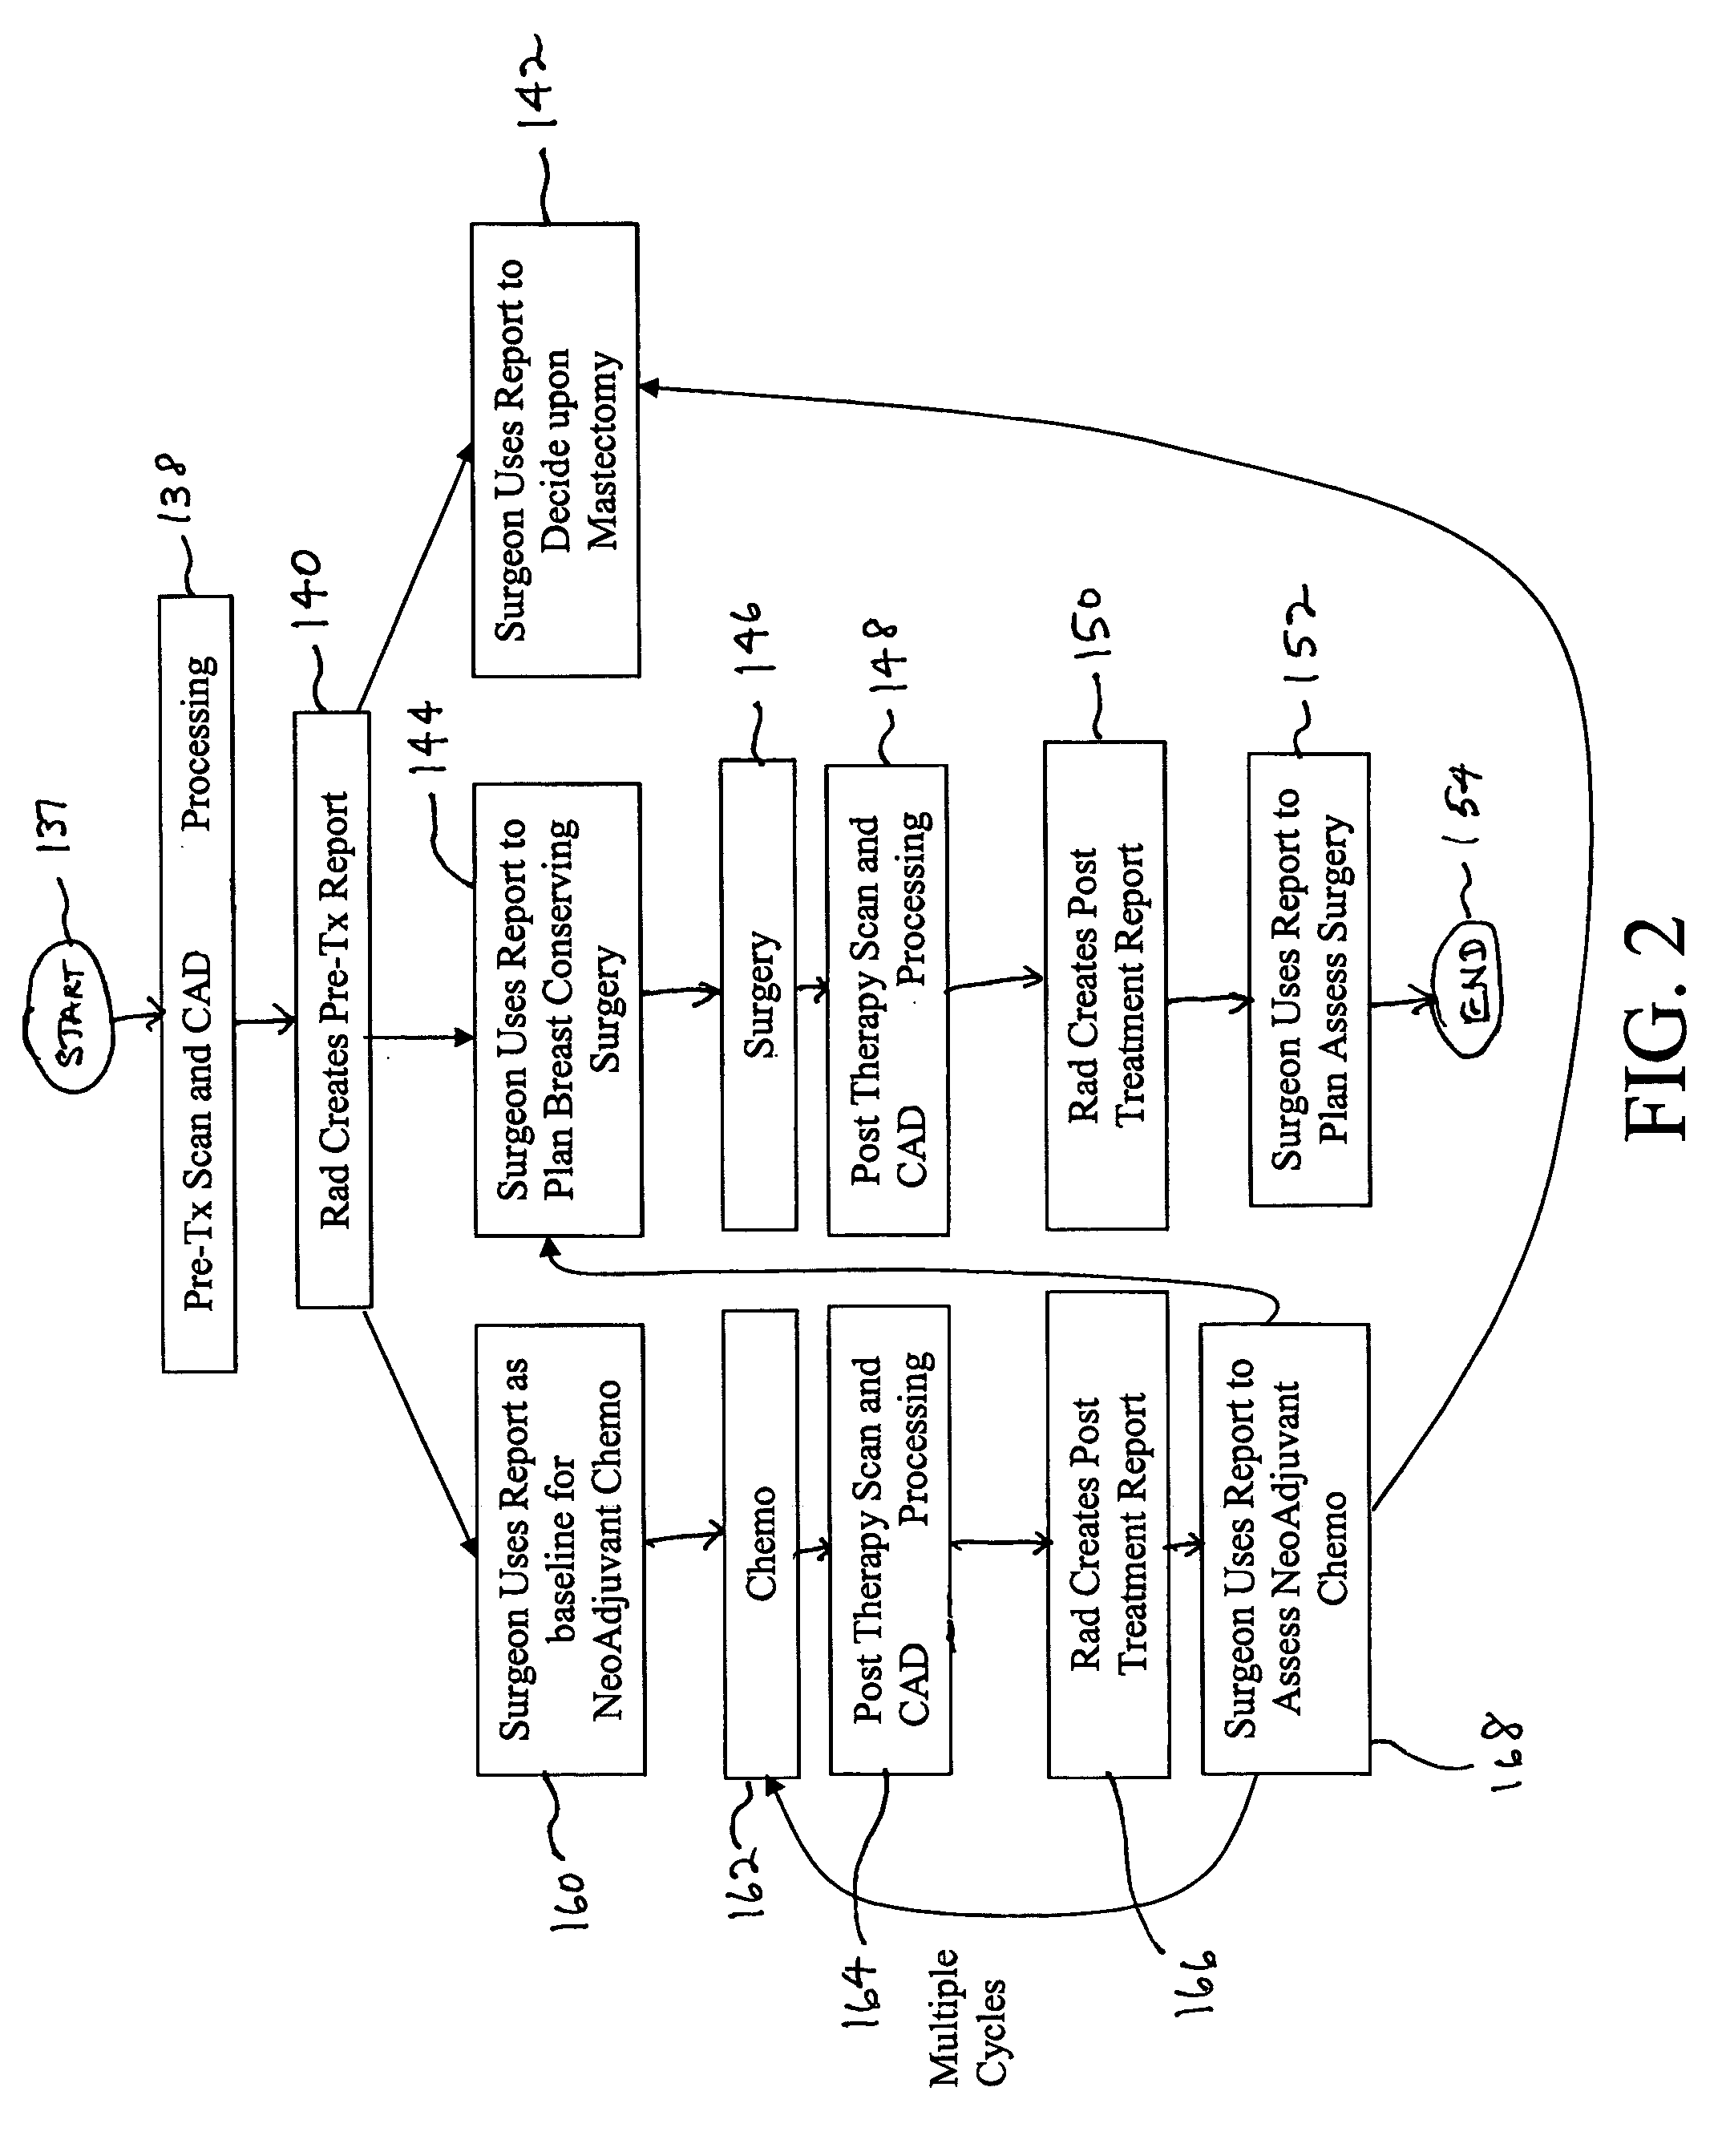 Apparatus and method for surgical planning and treatment monitoring